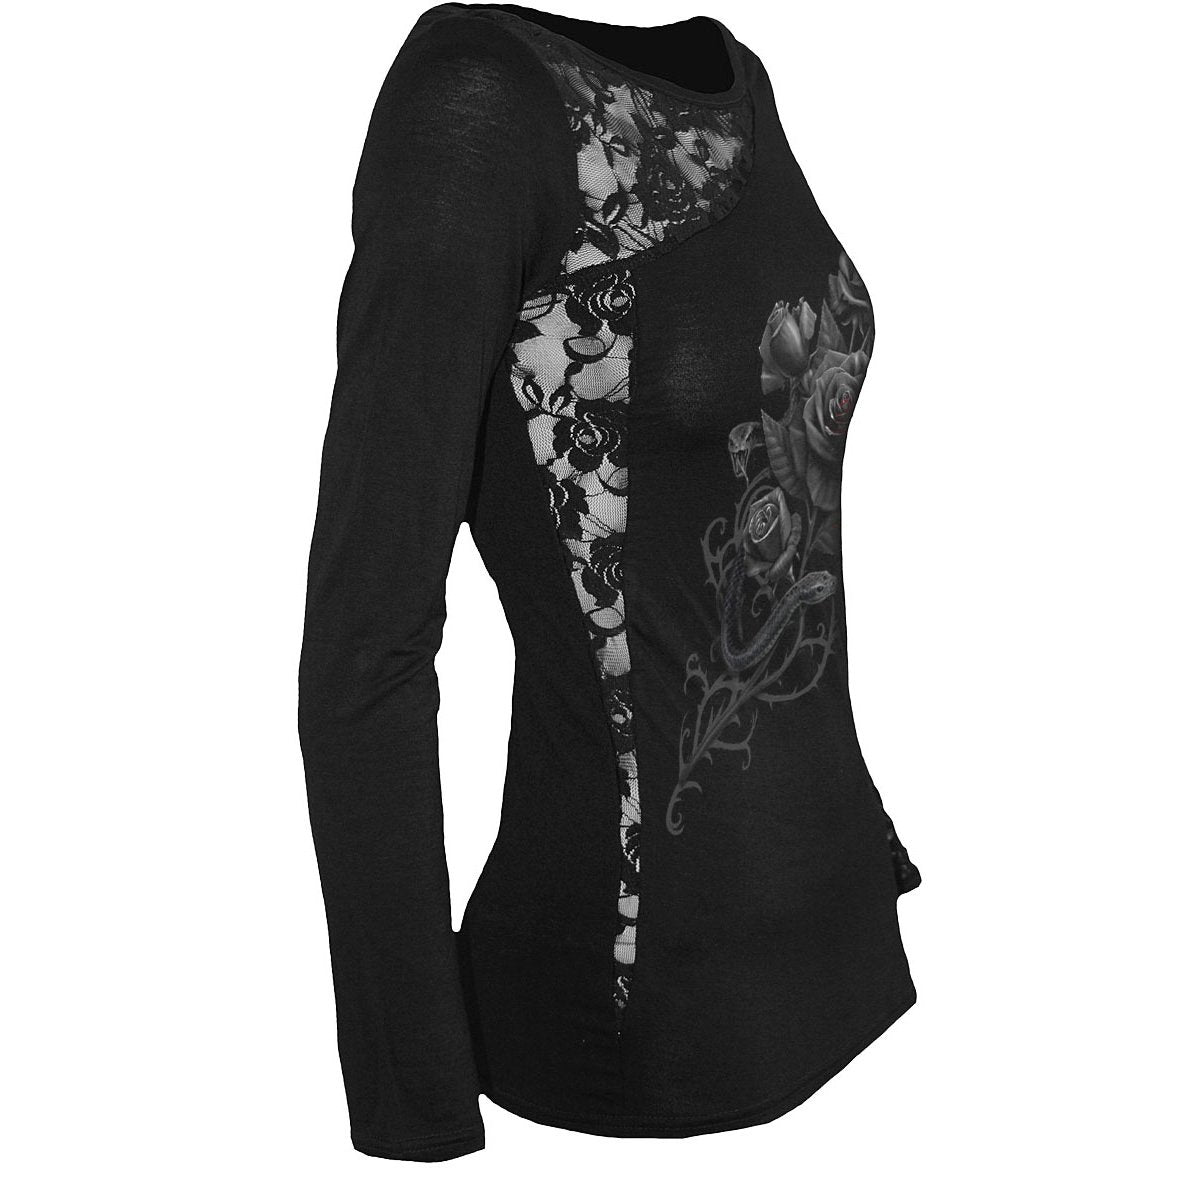 FATAL ATTRACTION - Lace One Shoulder Top Black - Spiral USA